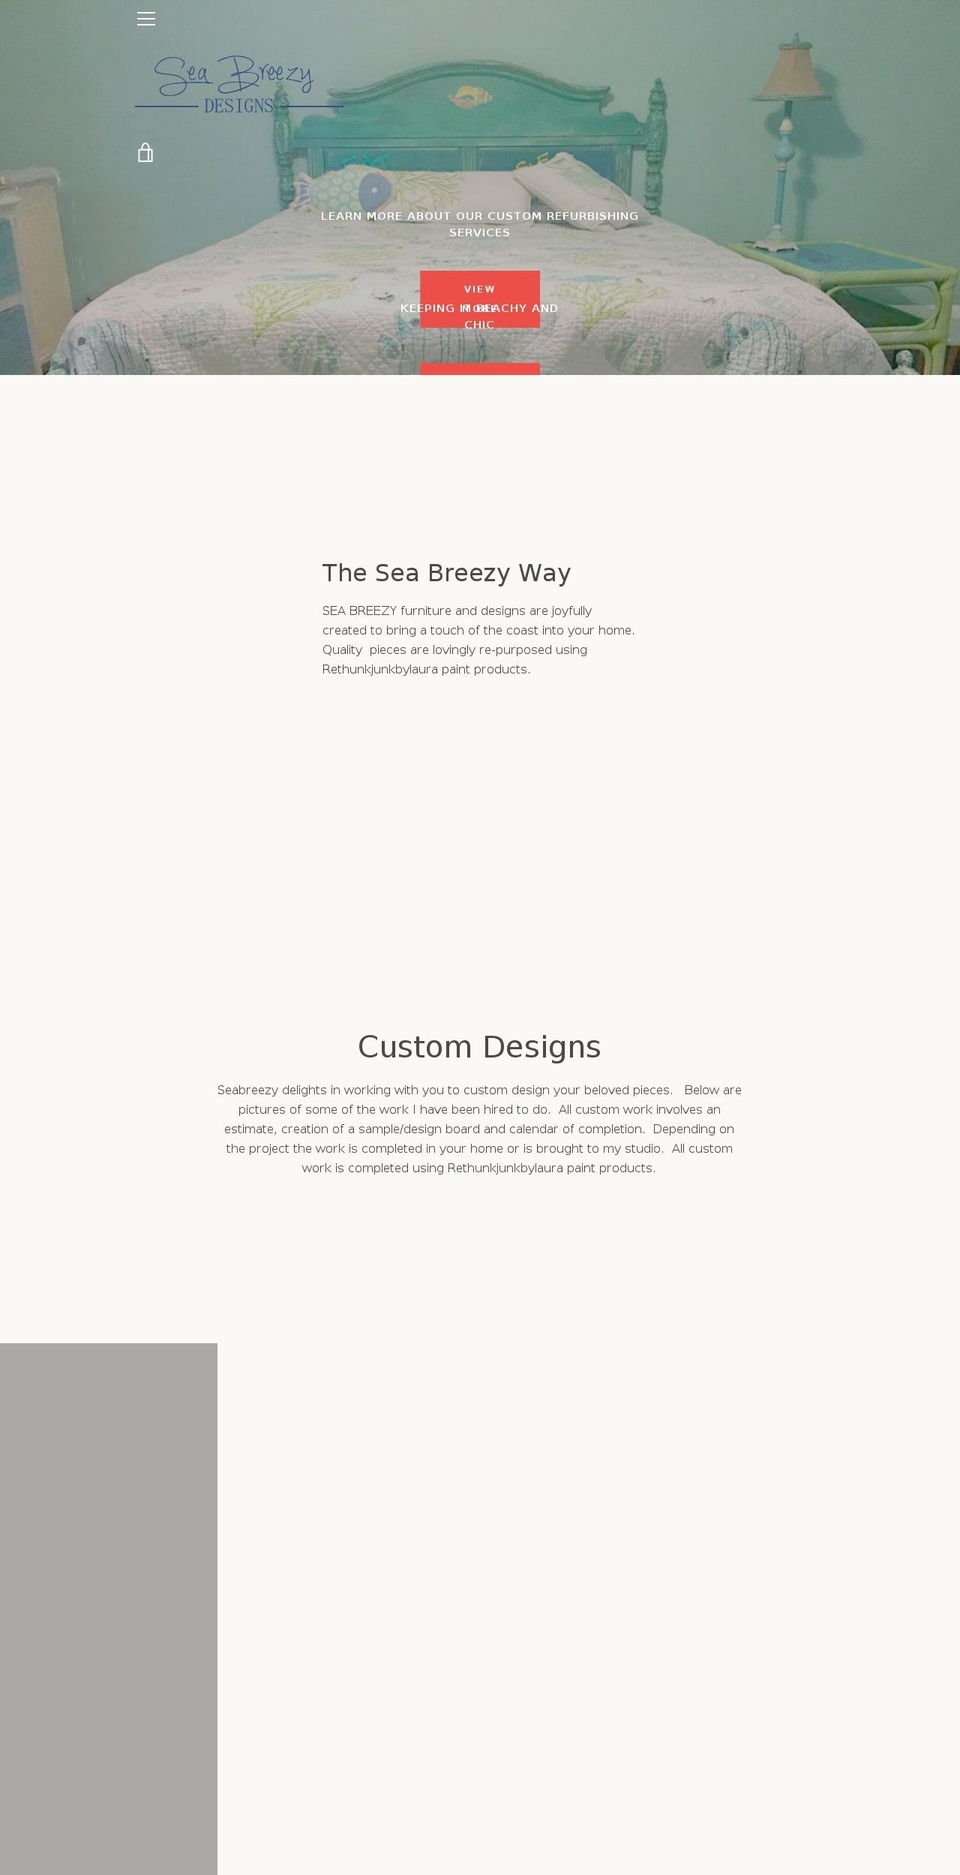 furniture Shopify theme site example seabreezy.com